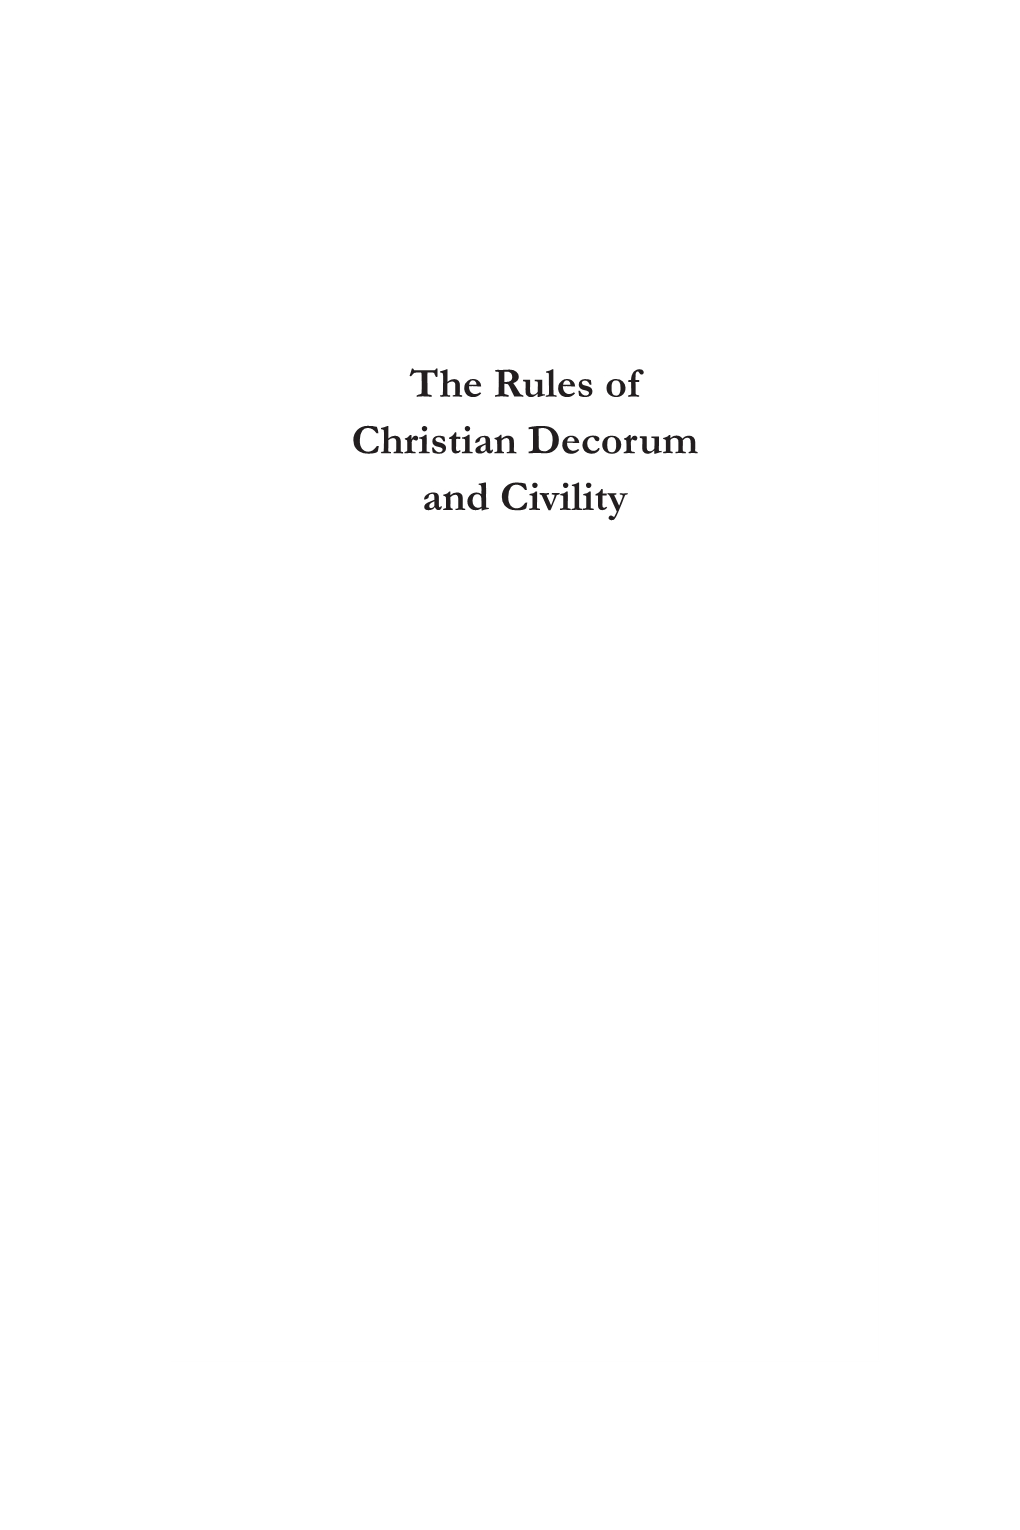 The Rules of Christian Decorum and Civility